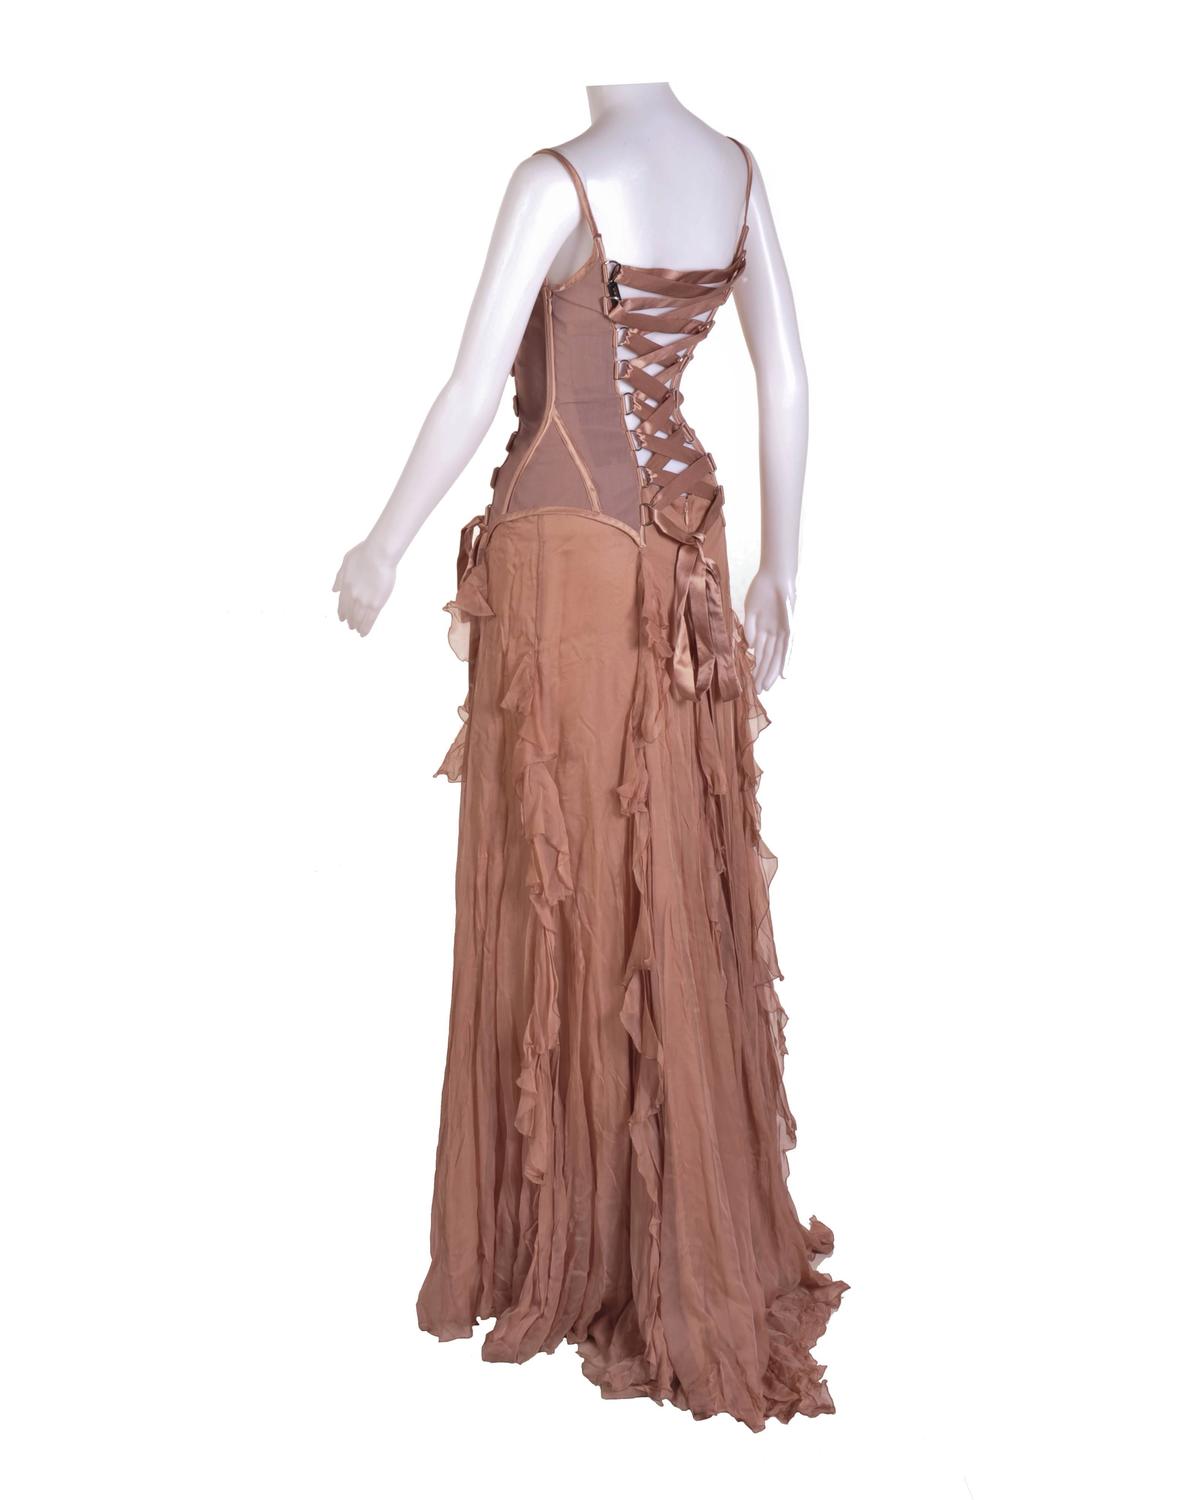 VERSACE Nude Corset Long Dress For Sale at 1stdibs